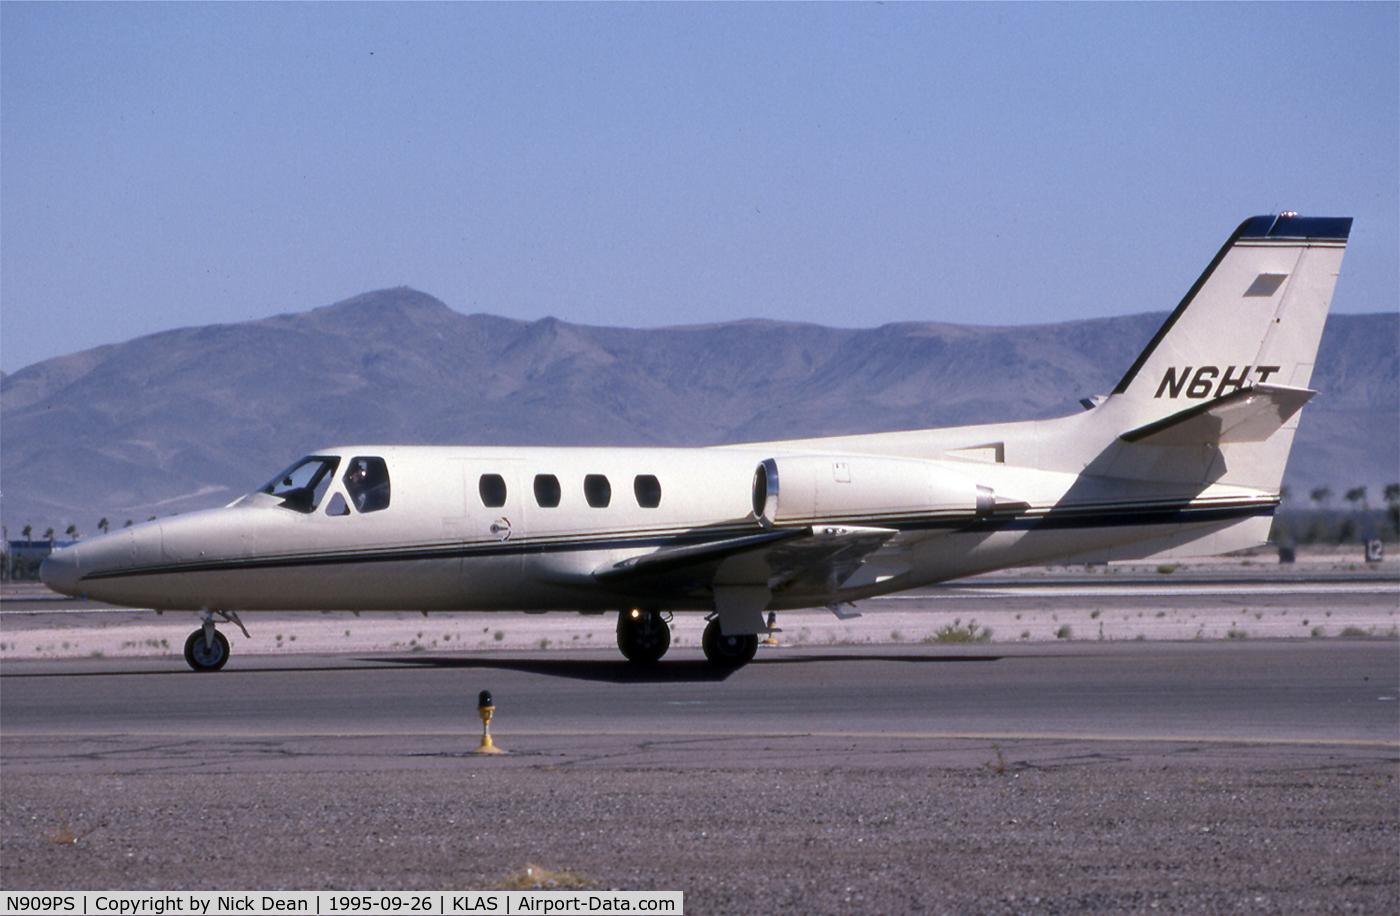 N909PS, 1977 Cessna 501 Citation I/SP C/N 501-0008, KLAS (Seen here as N6HT and currently registered N909PS as posted)